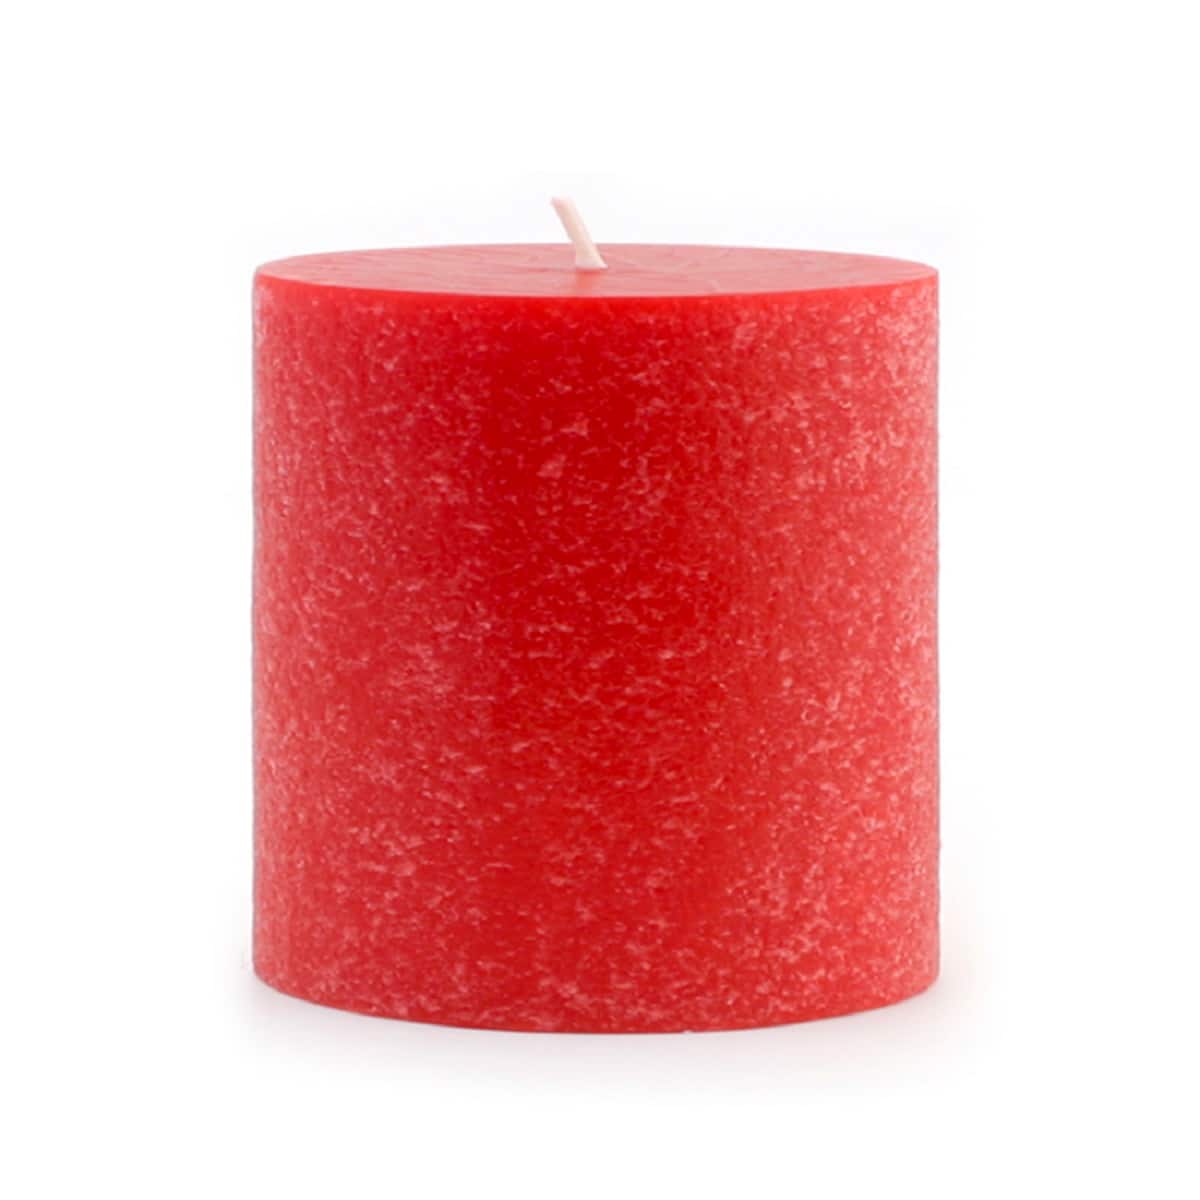 Root Candles 3" x 3" Unscented Timberline™ Pillar Candle